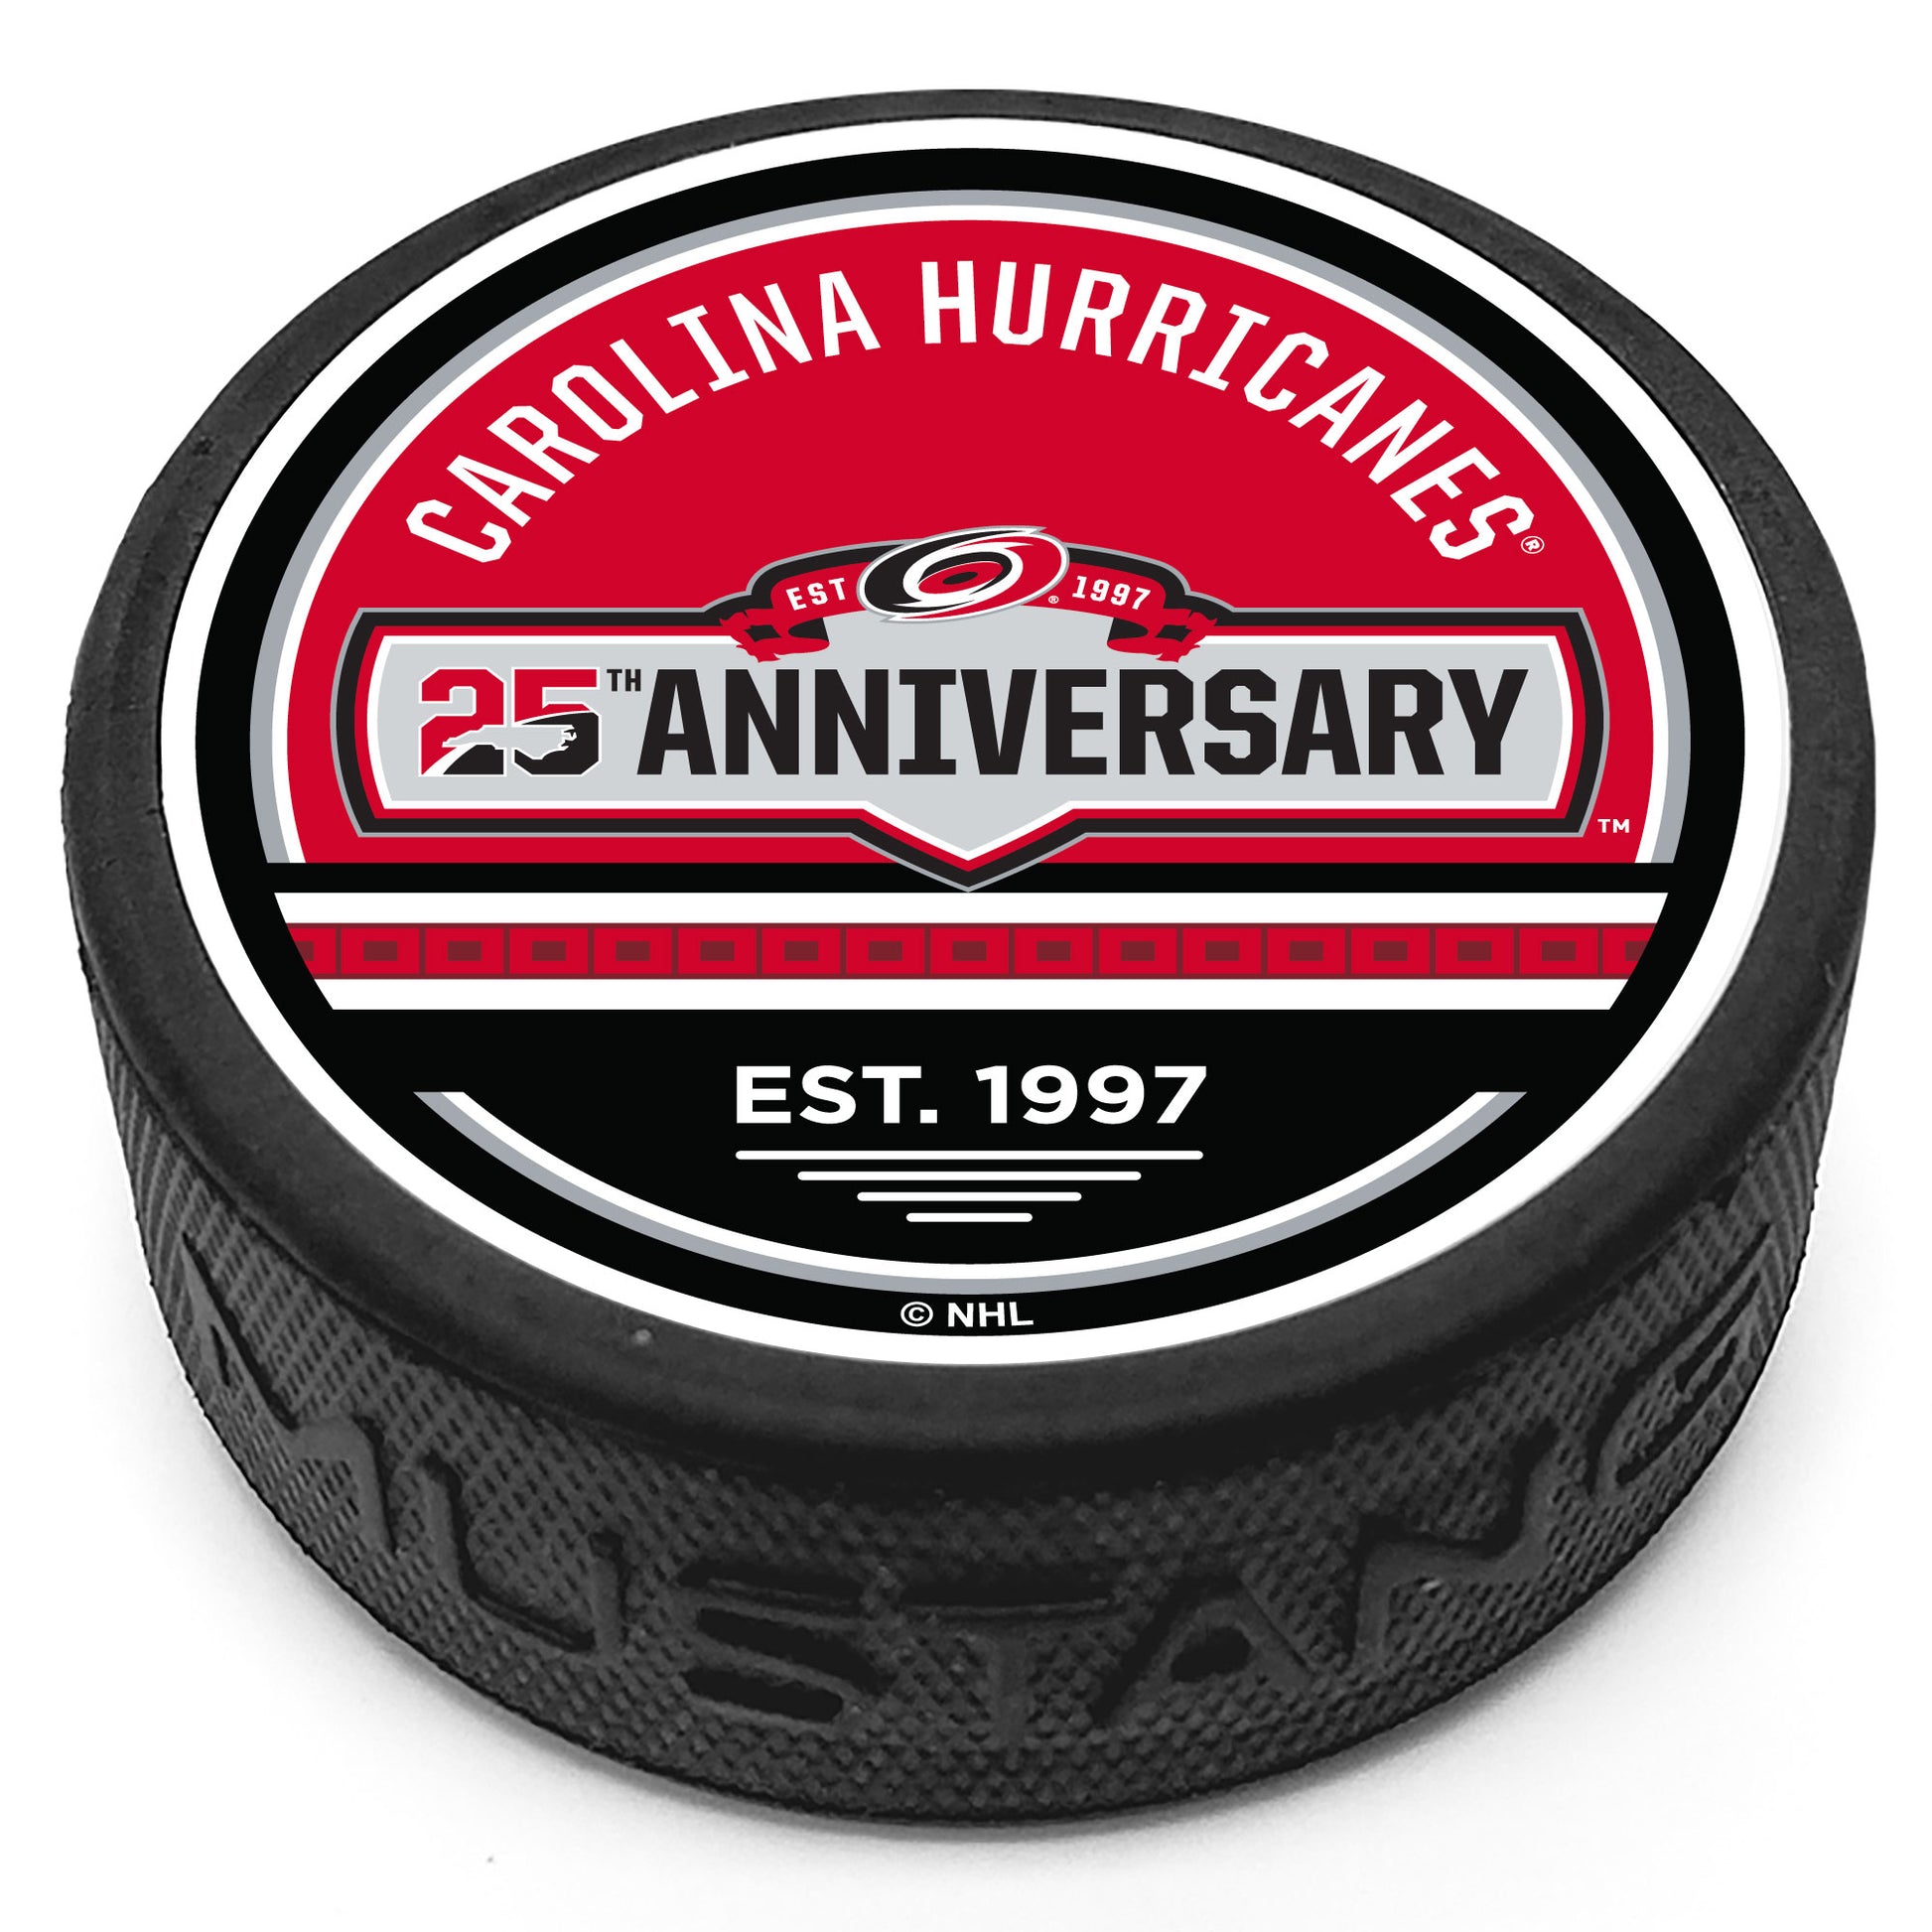 Hockey puck with the Hurricanes 25th Anniversary jersey patch logo in the center with "Carolina Hurricanes" above and our signature flag stripe with the phrase "Est. 1997" below on a red and black top face.